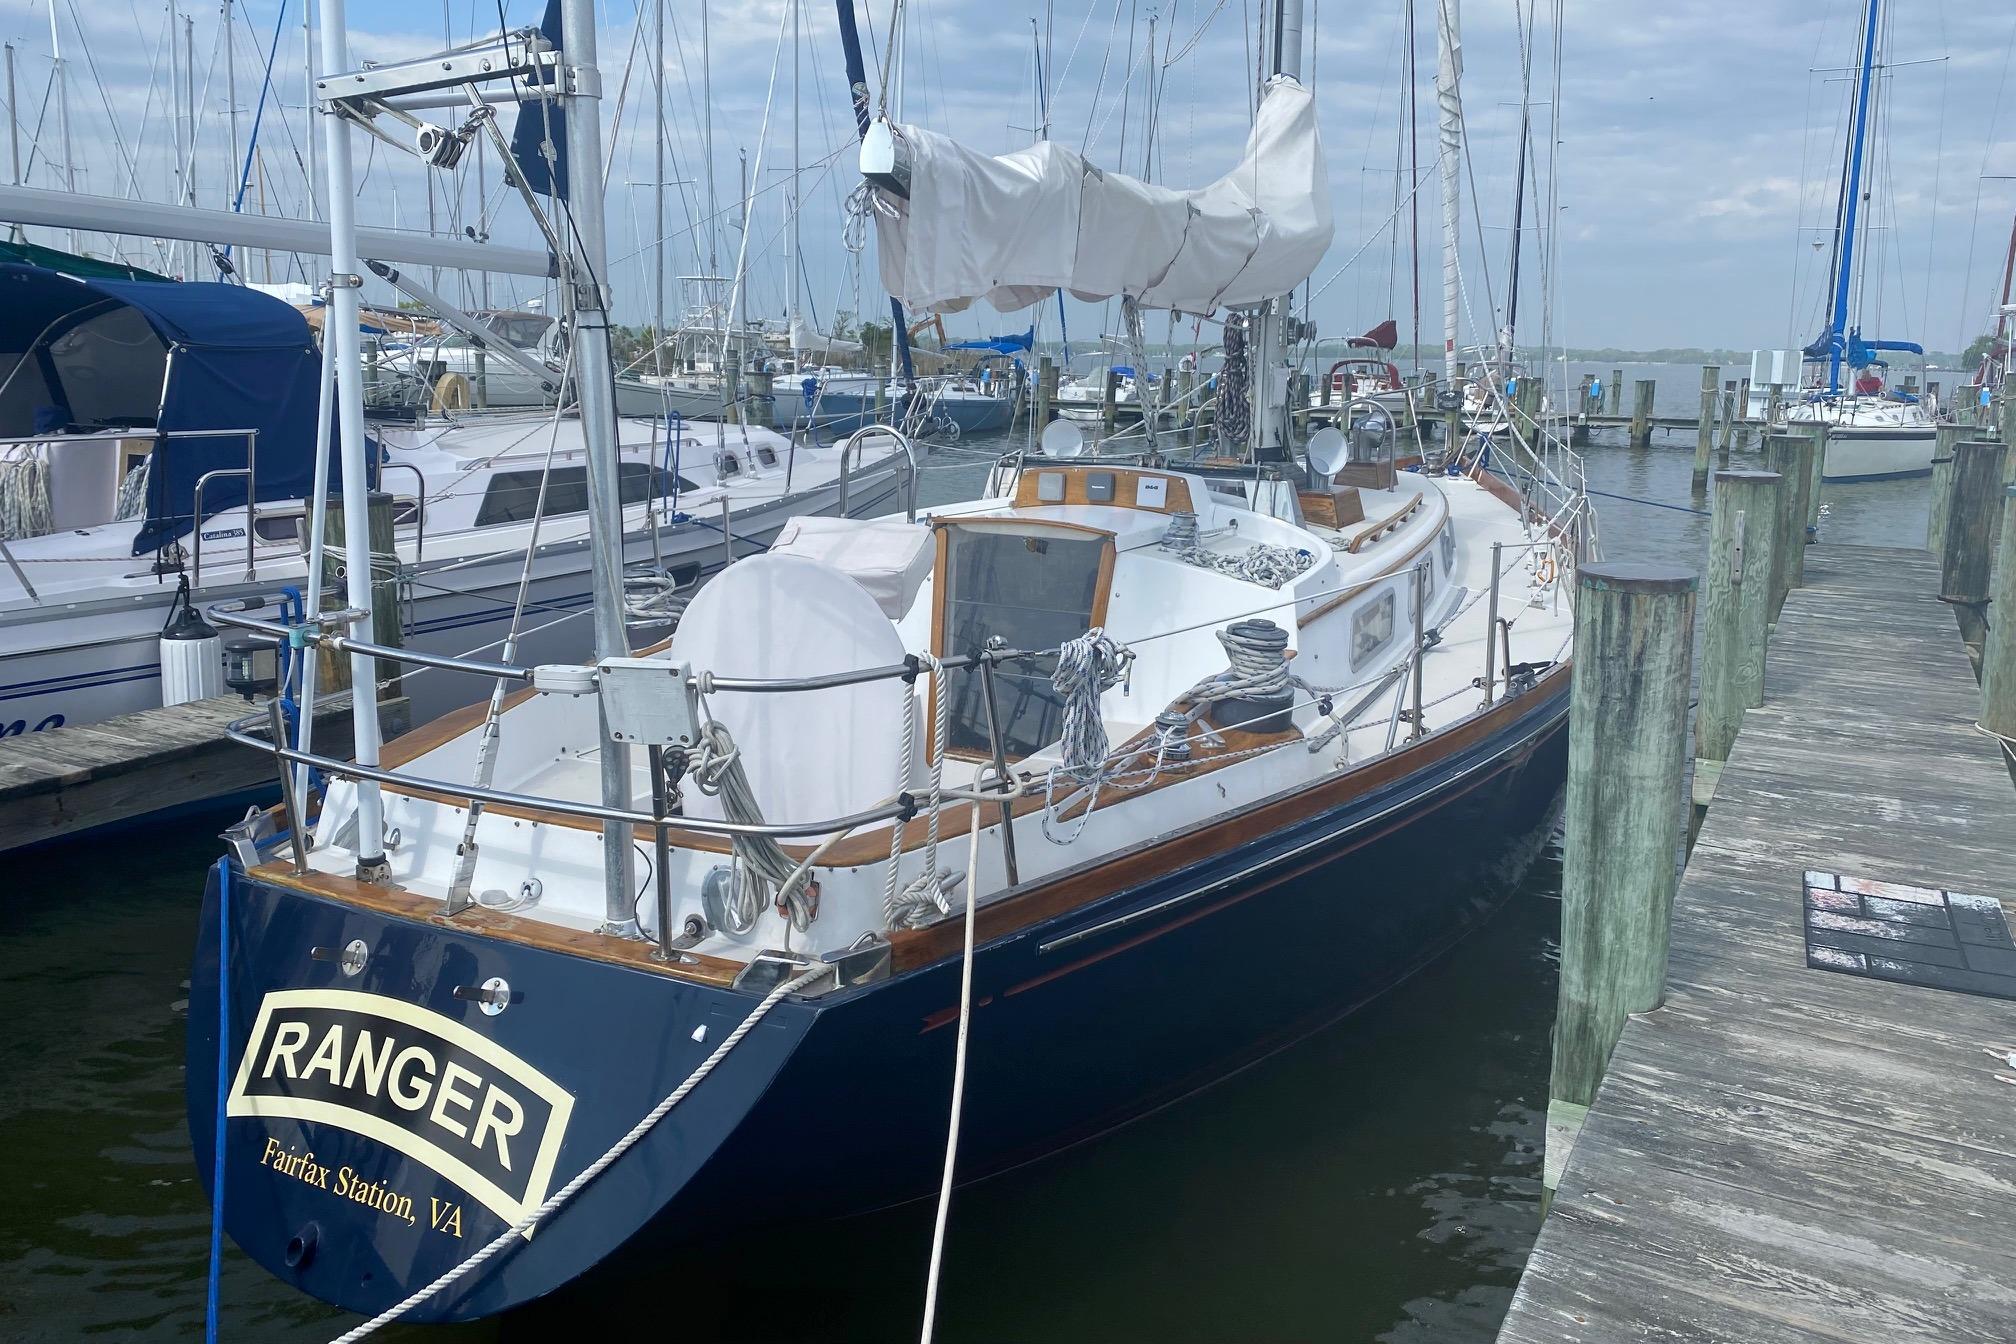 Ranger Yacht Brokers of Annapolis